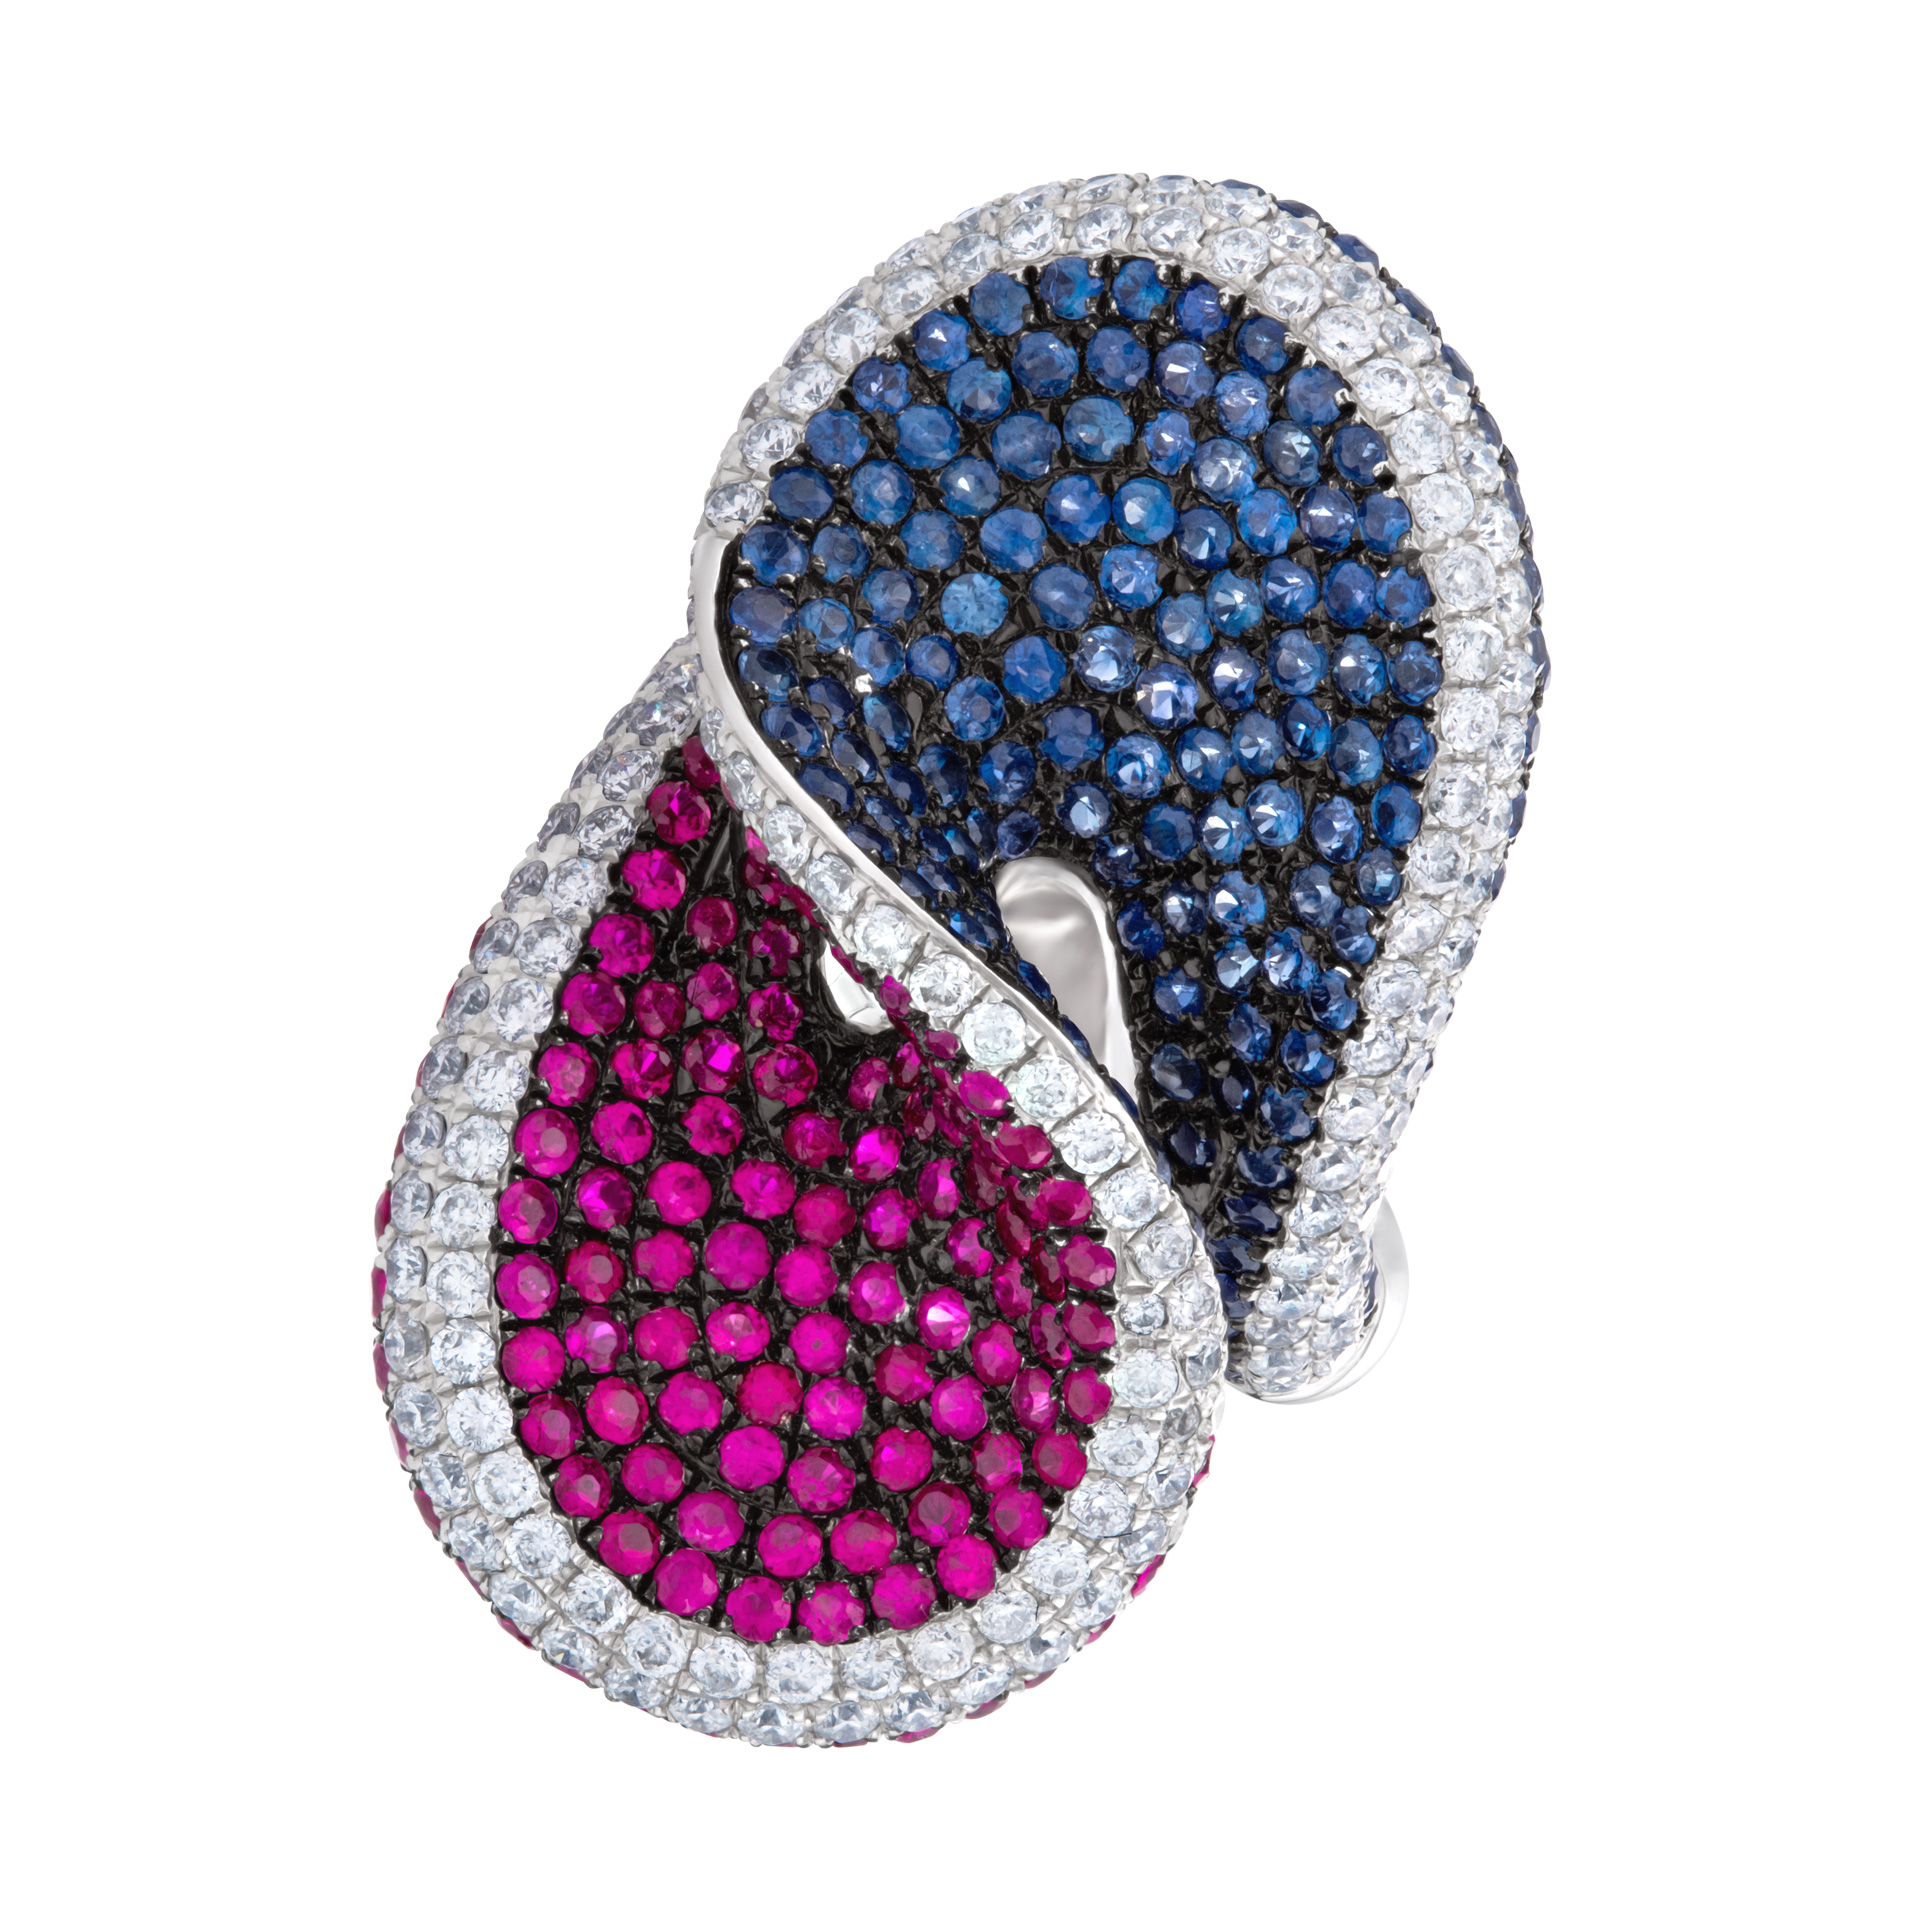 Beautiful twisted diamond, sapphire and ruby ring set in 18k white gold. Size 7